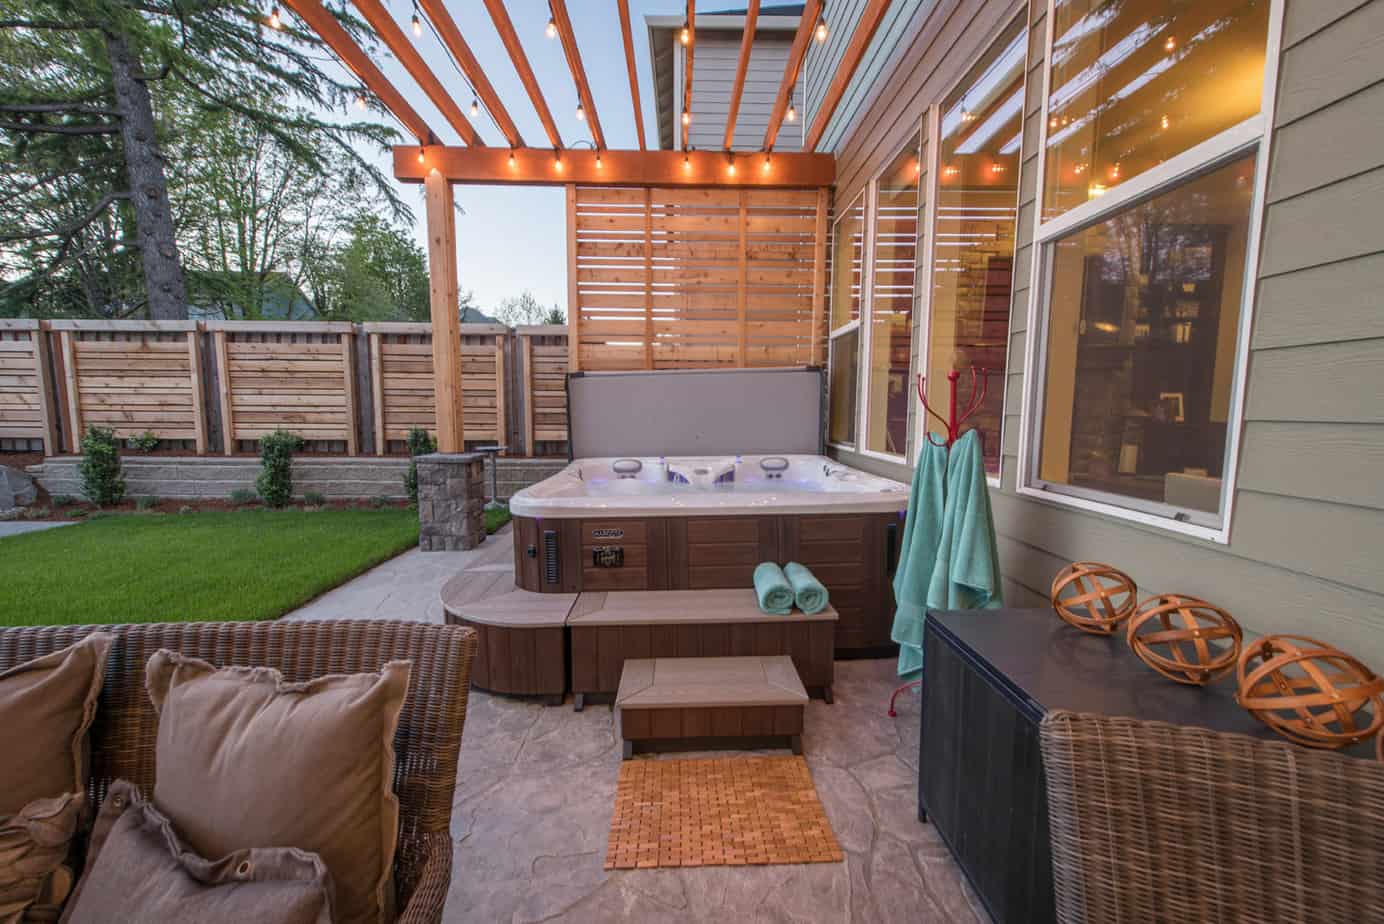 A garden hot tub with privacy